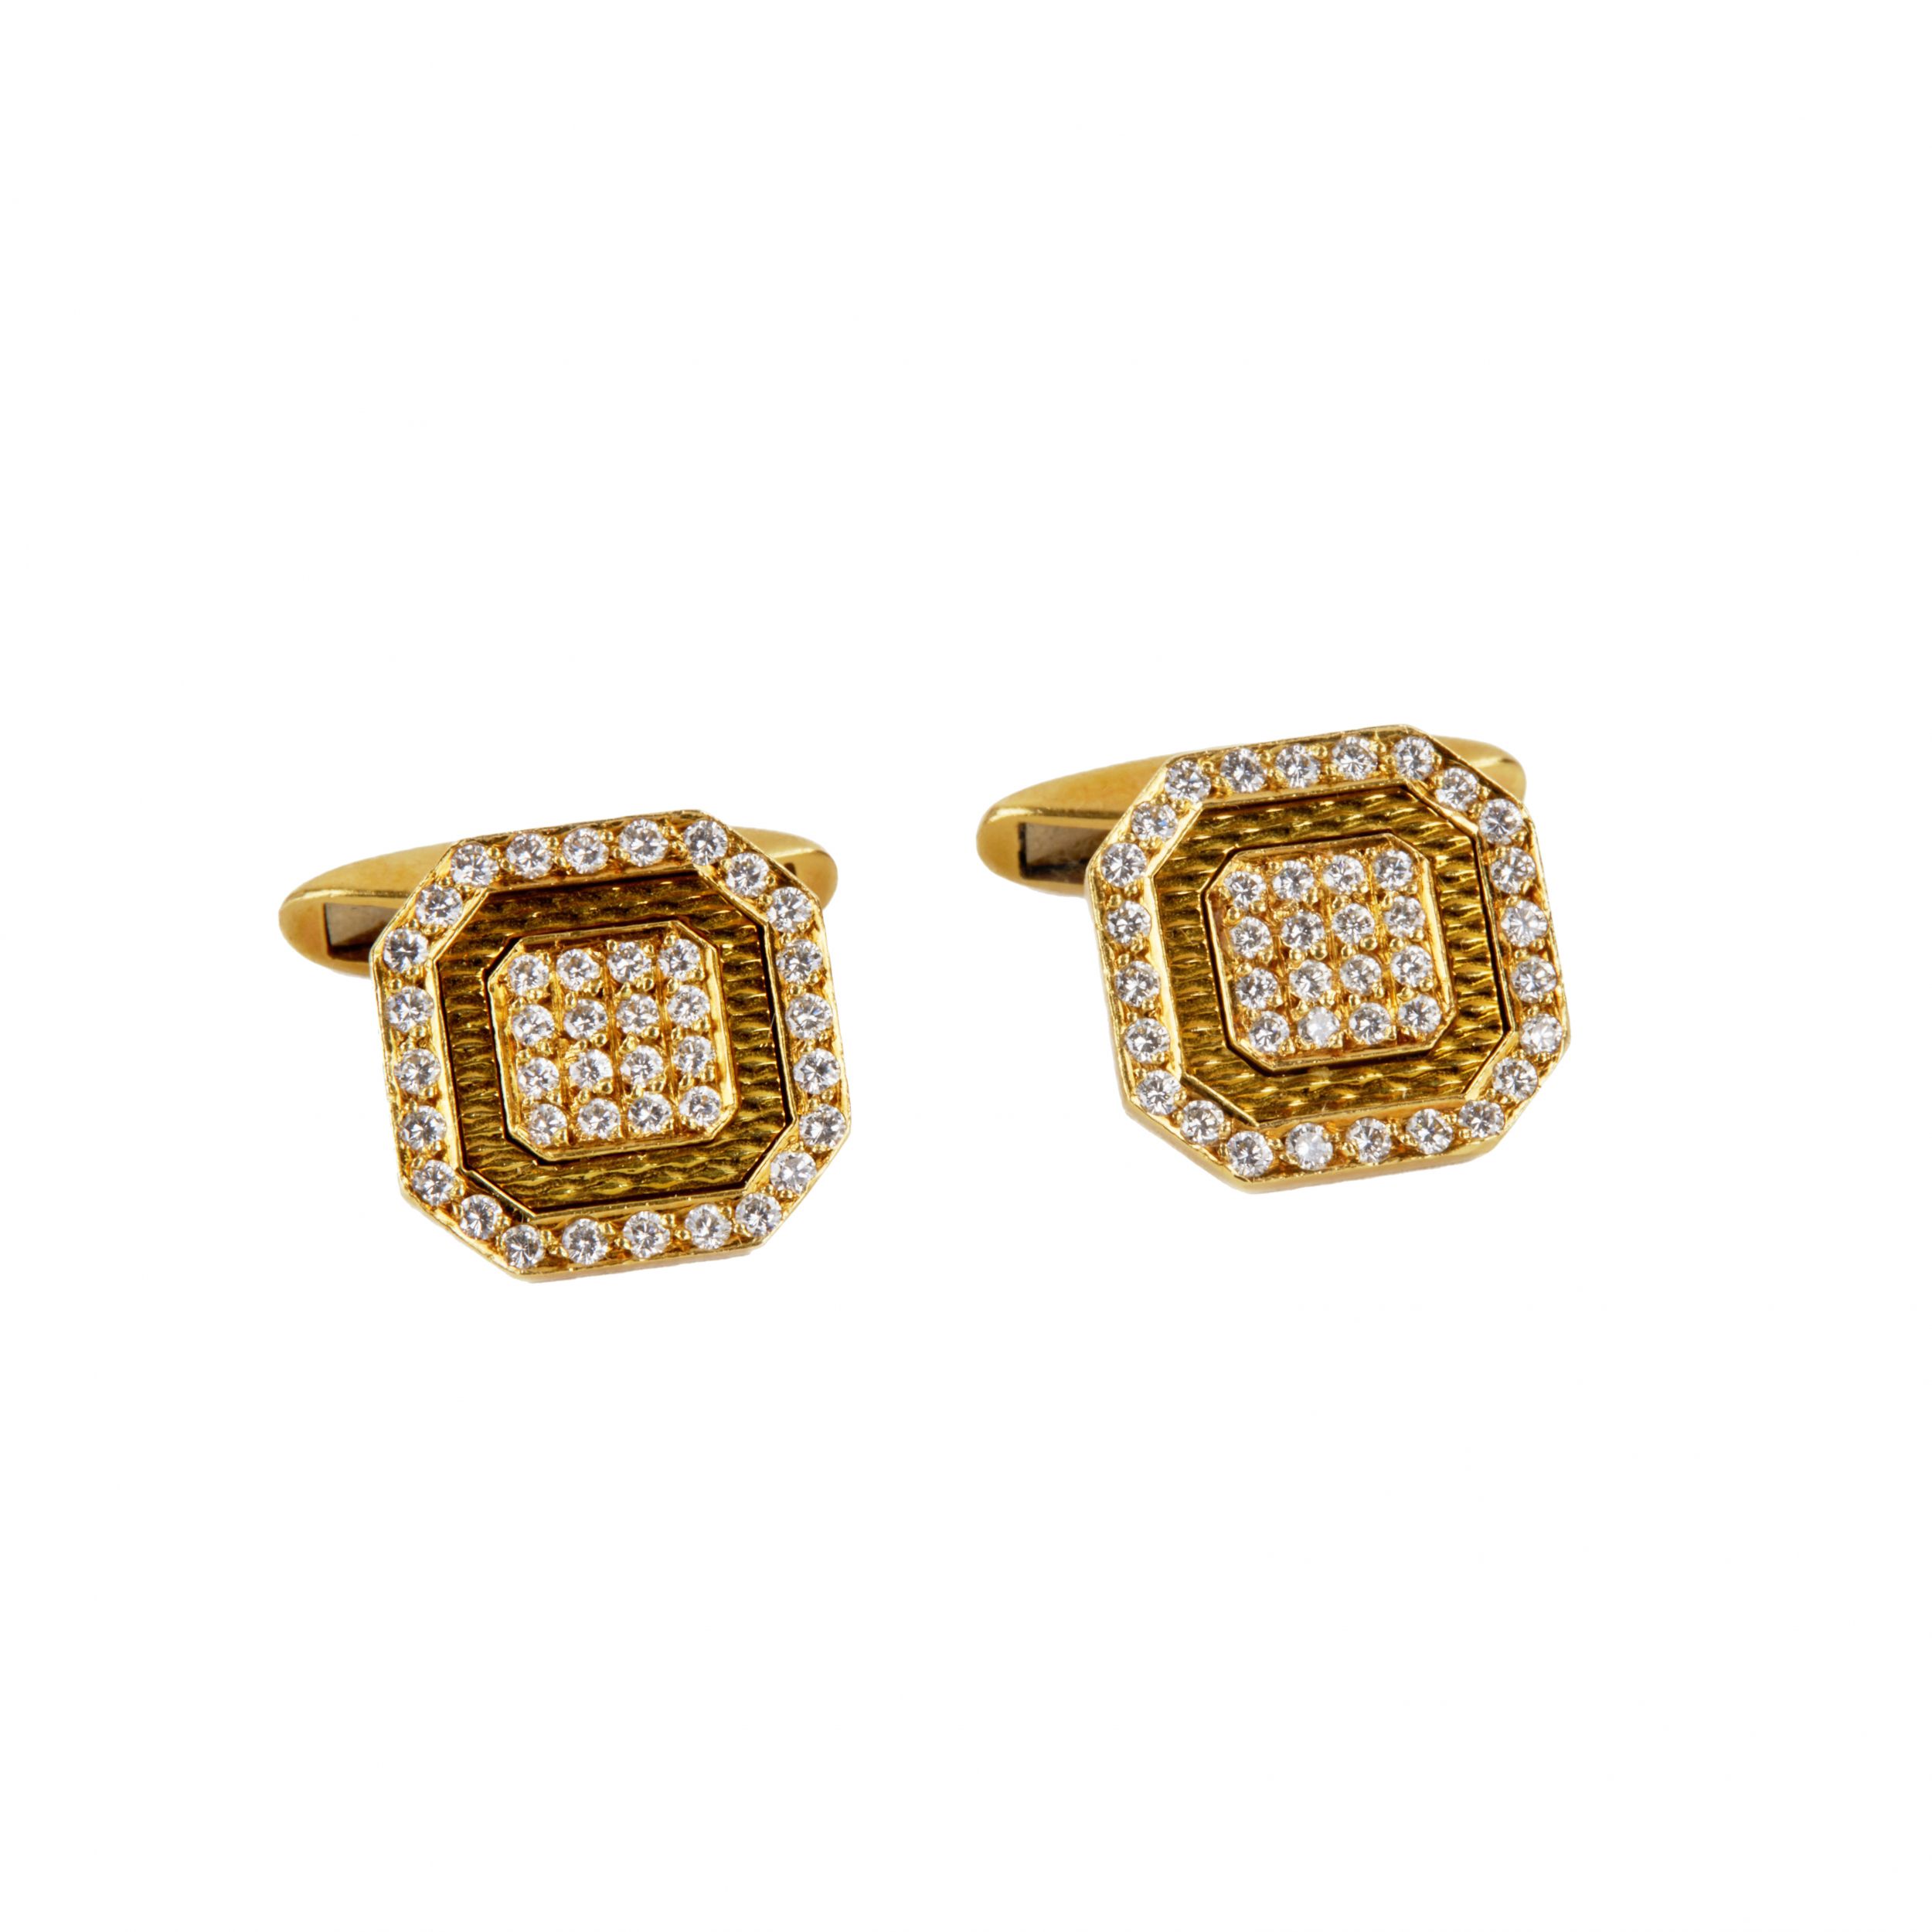 Gold-Chopard-cufflinks-with-guilloche-and-diamonds-